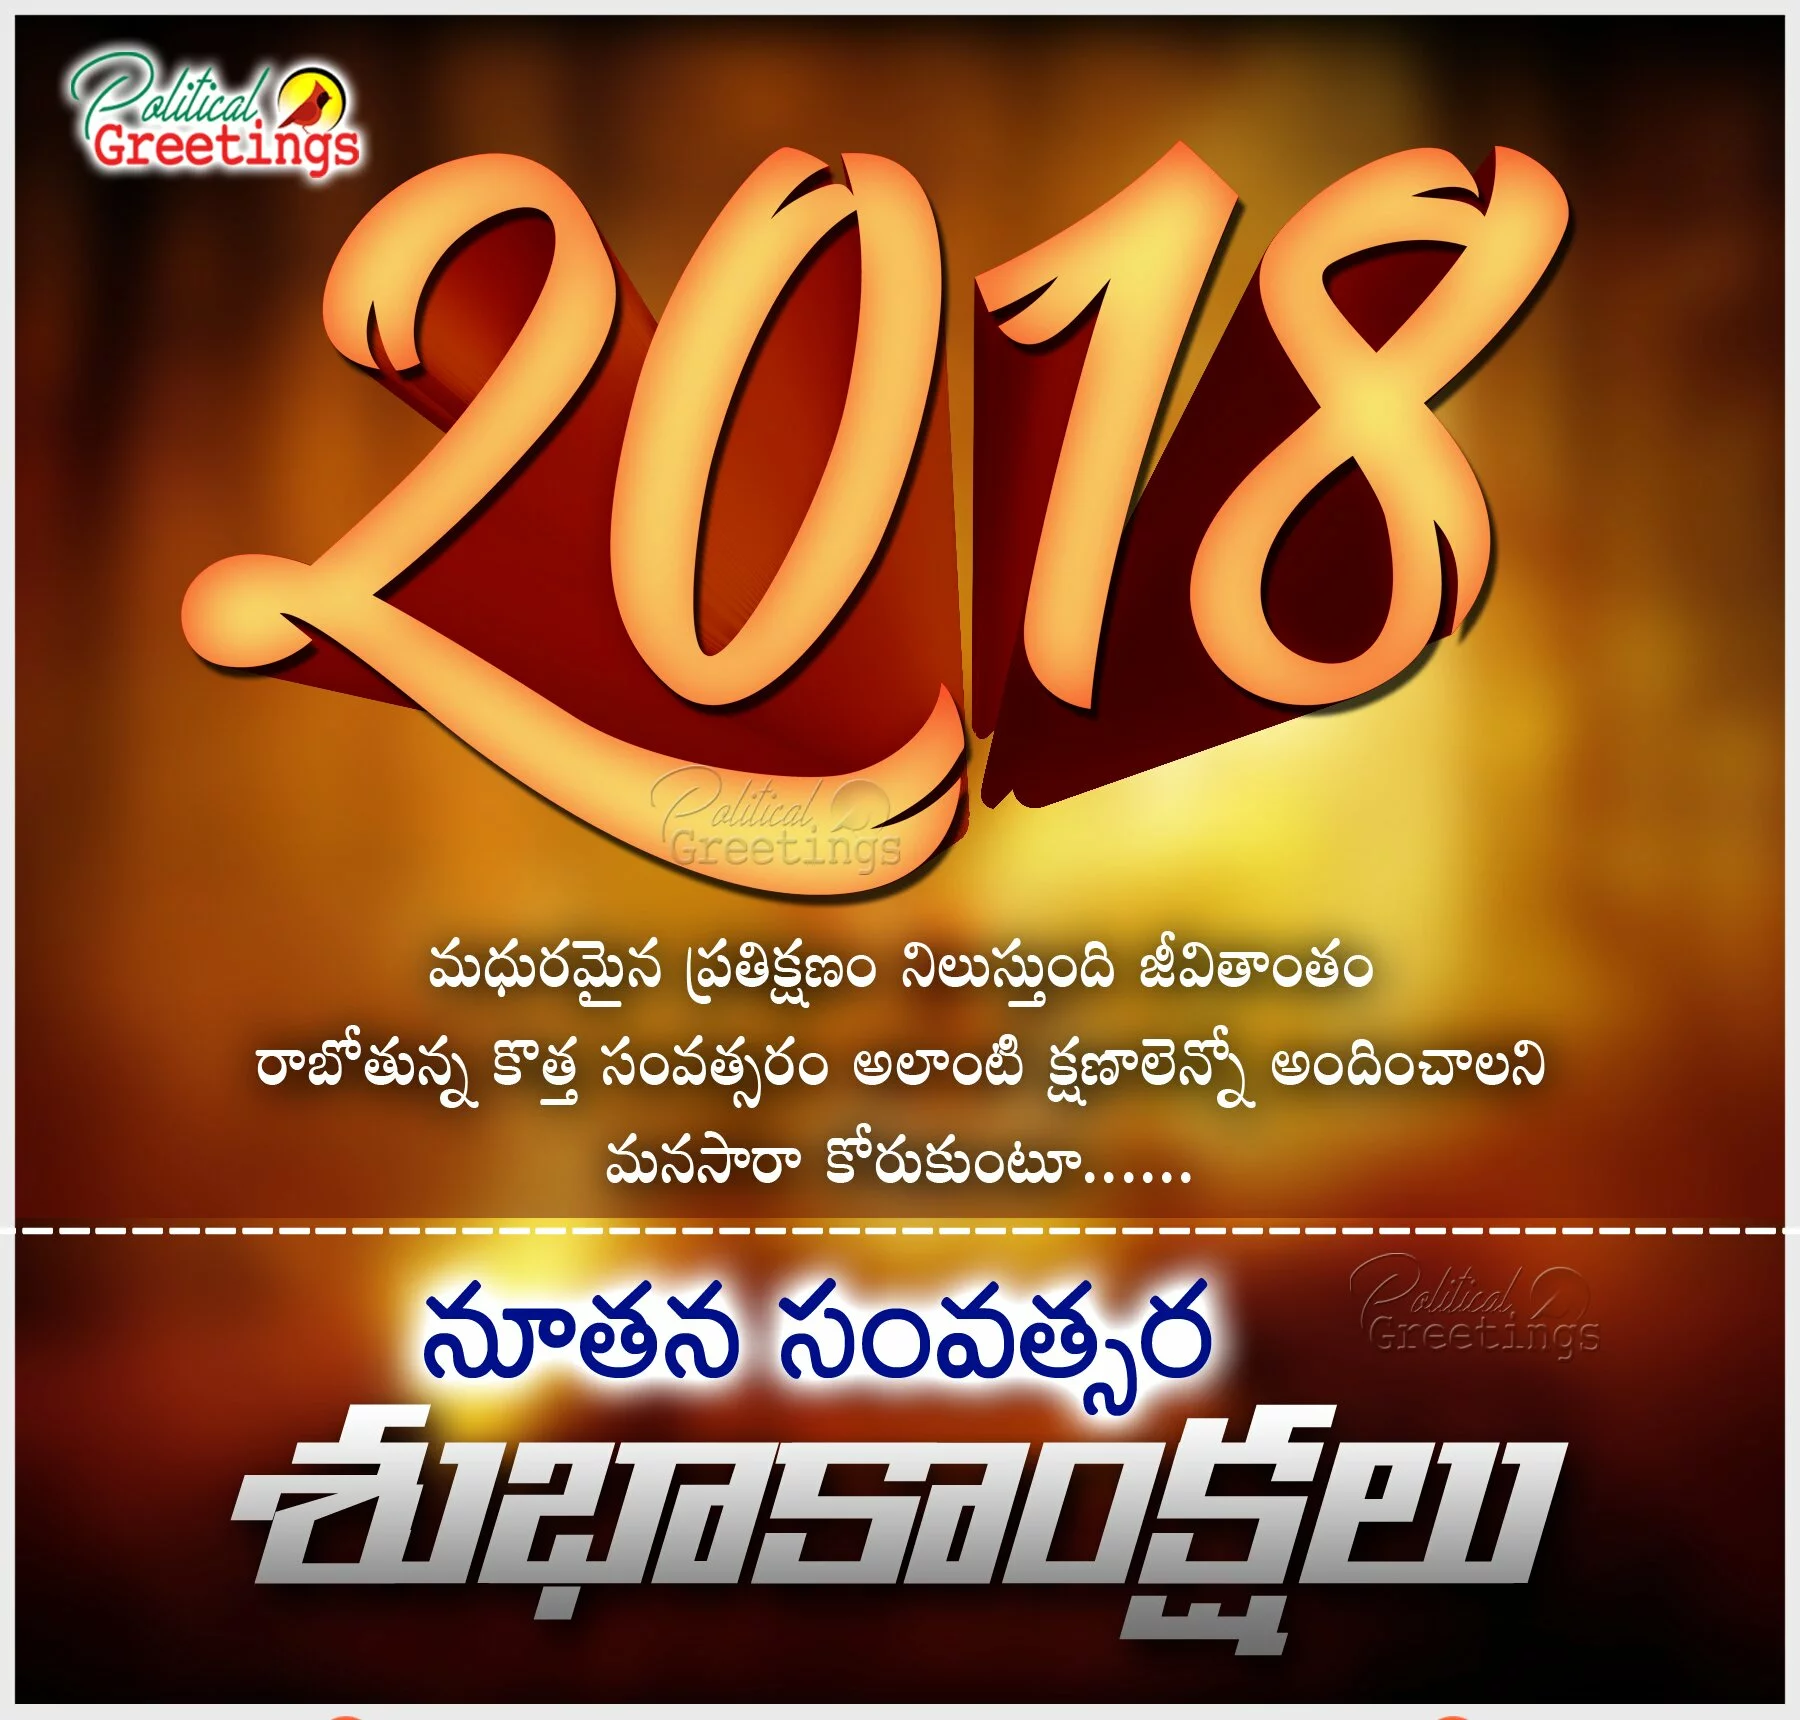 2018 Trending Happy New year Greetings With Vector Wallpapers Free Download